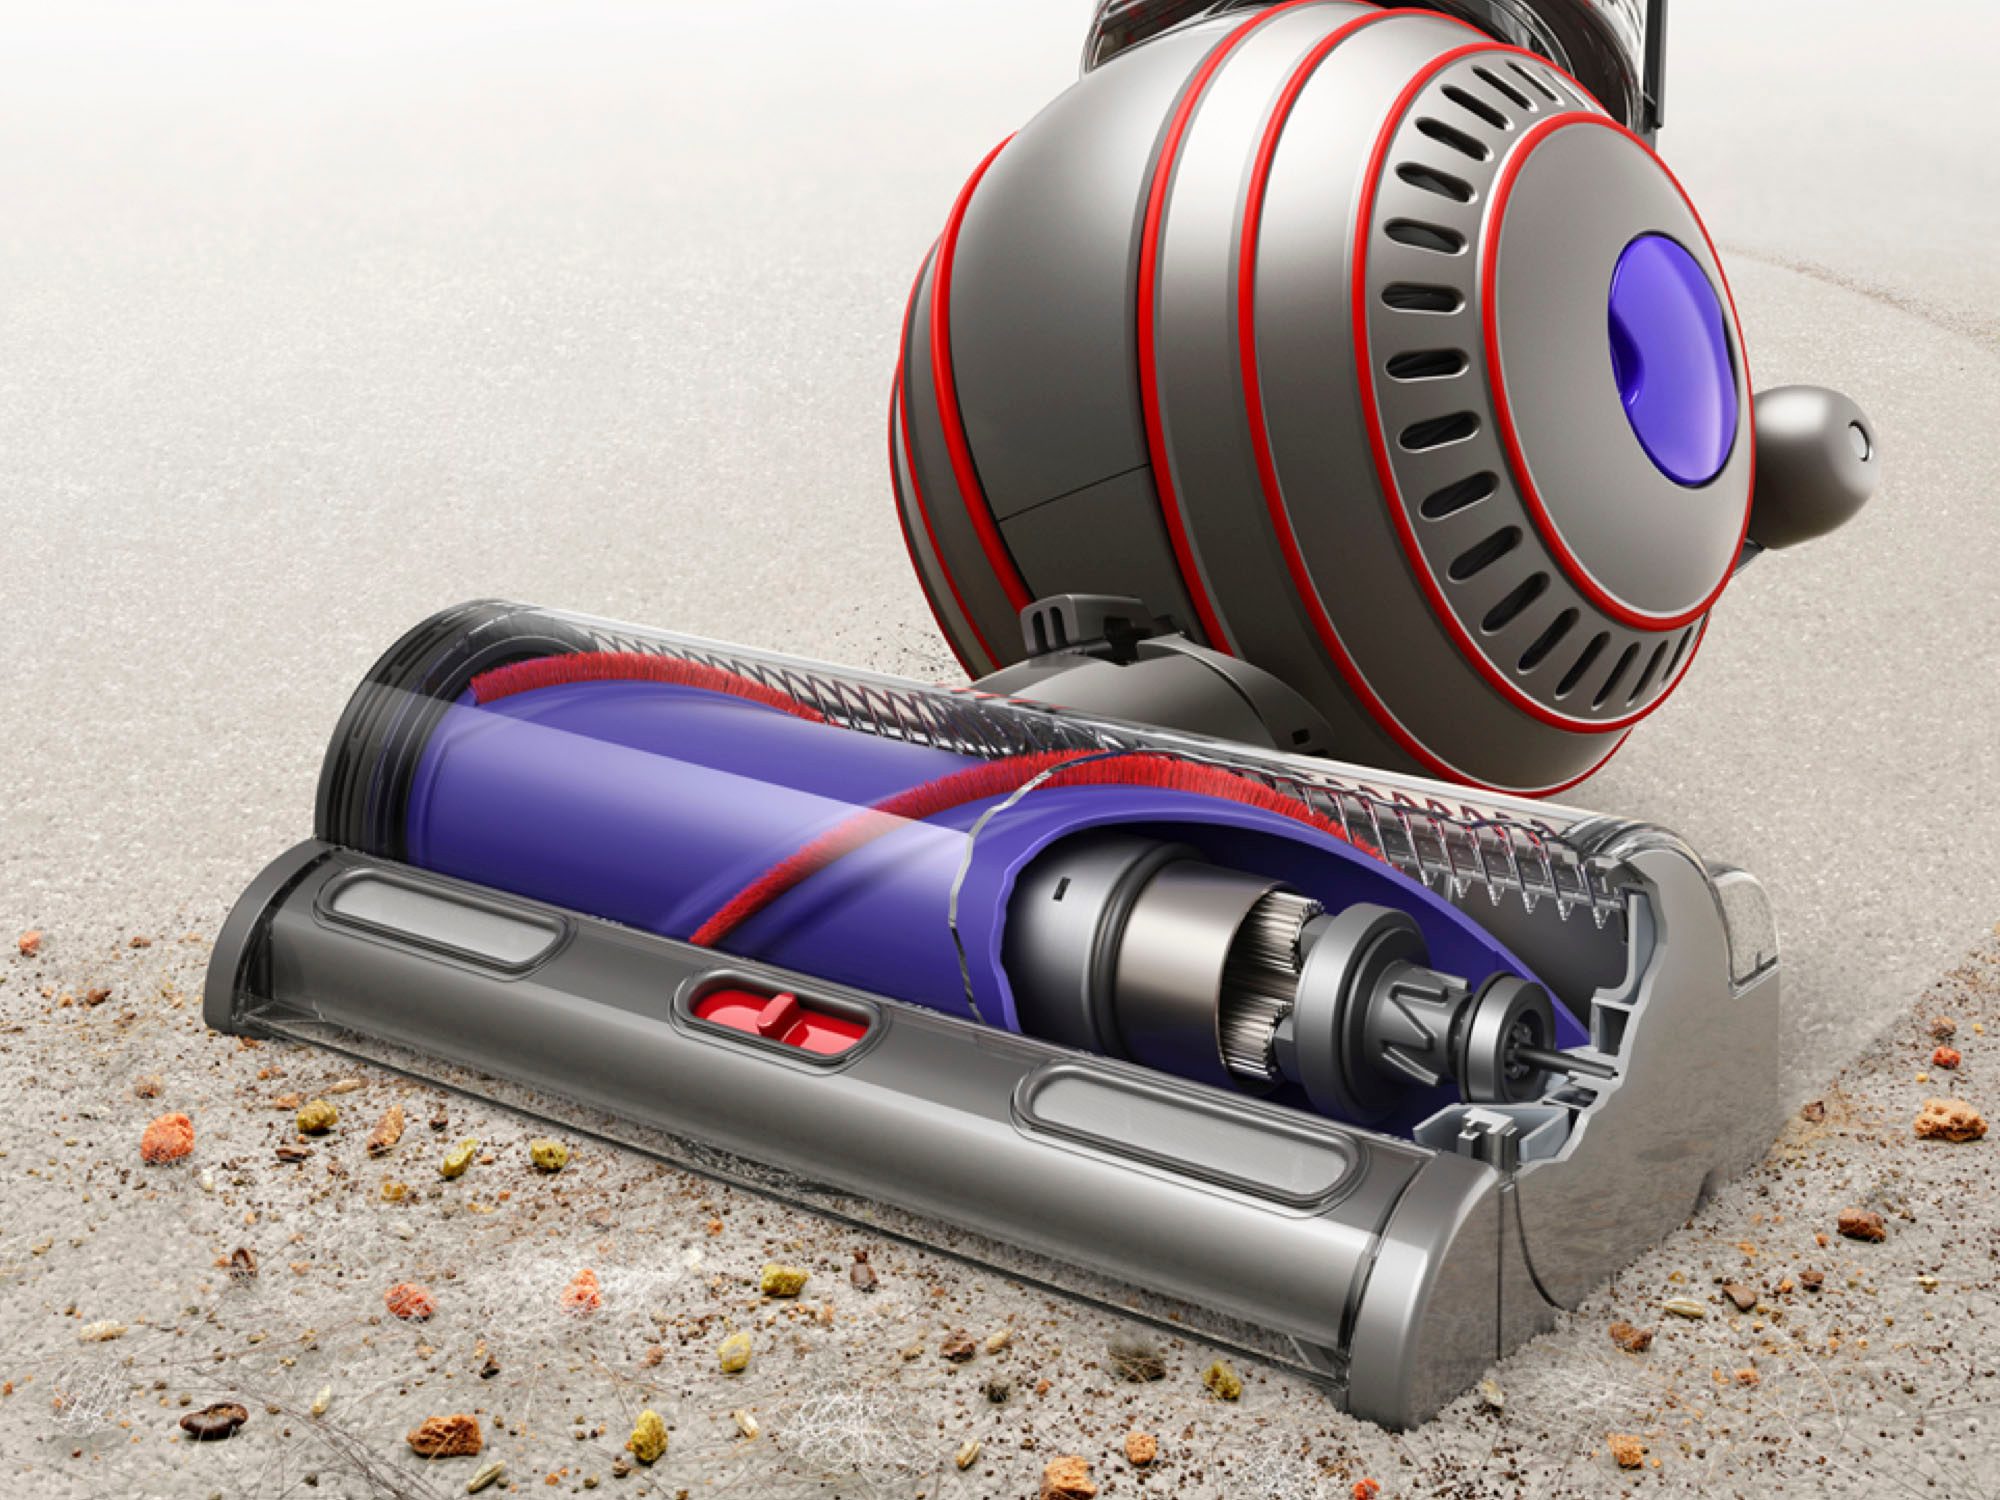 Dyson Ball Animal 3 sucking up crumbs from a dirty carpet.